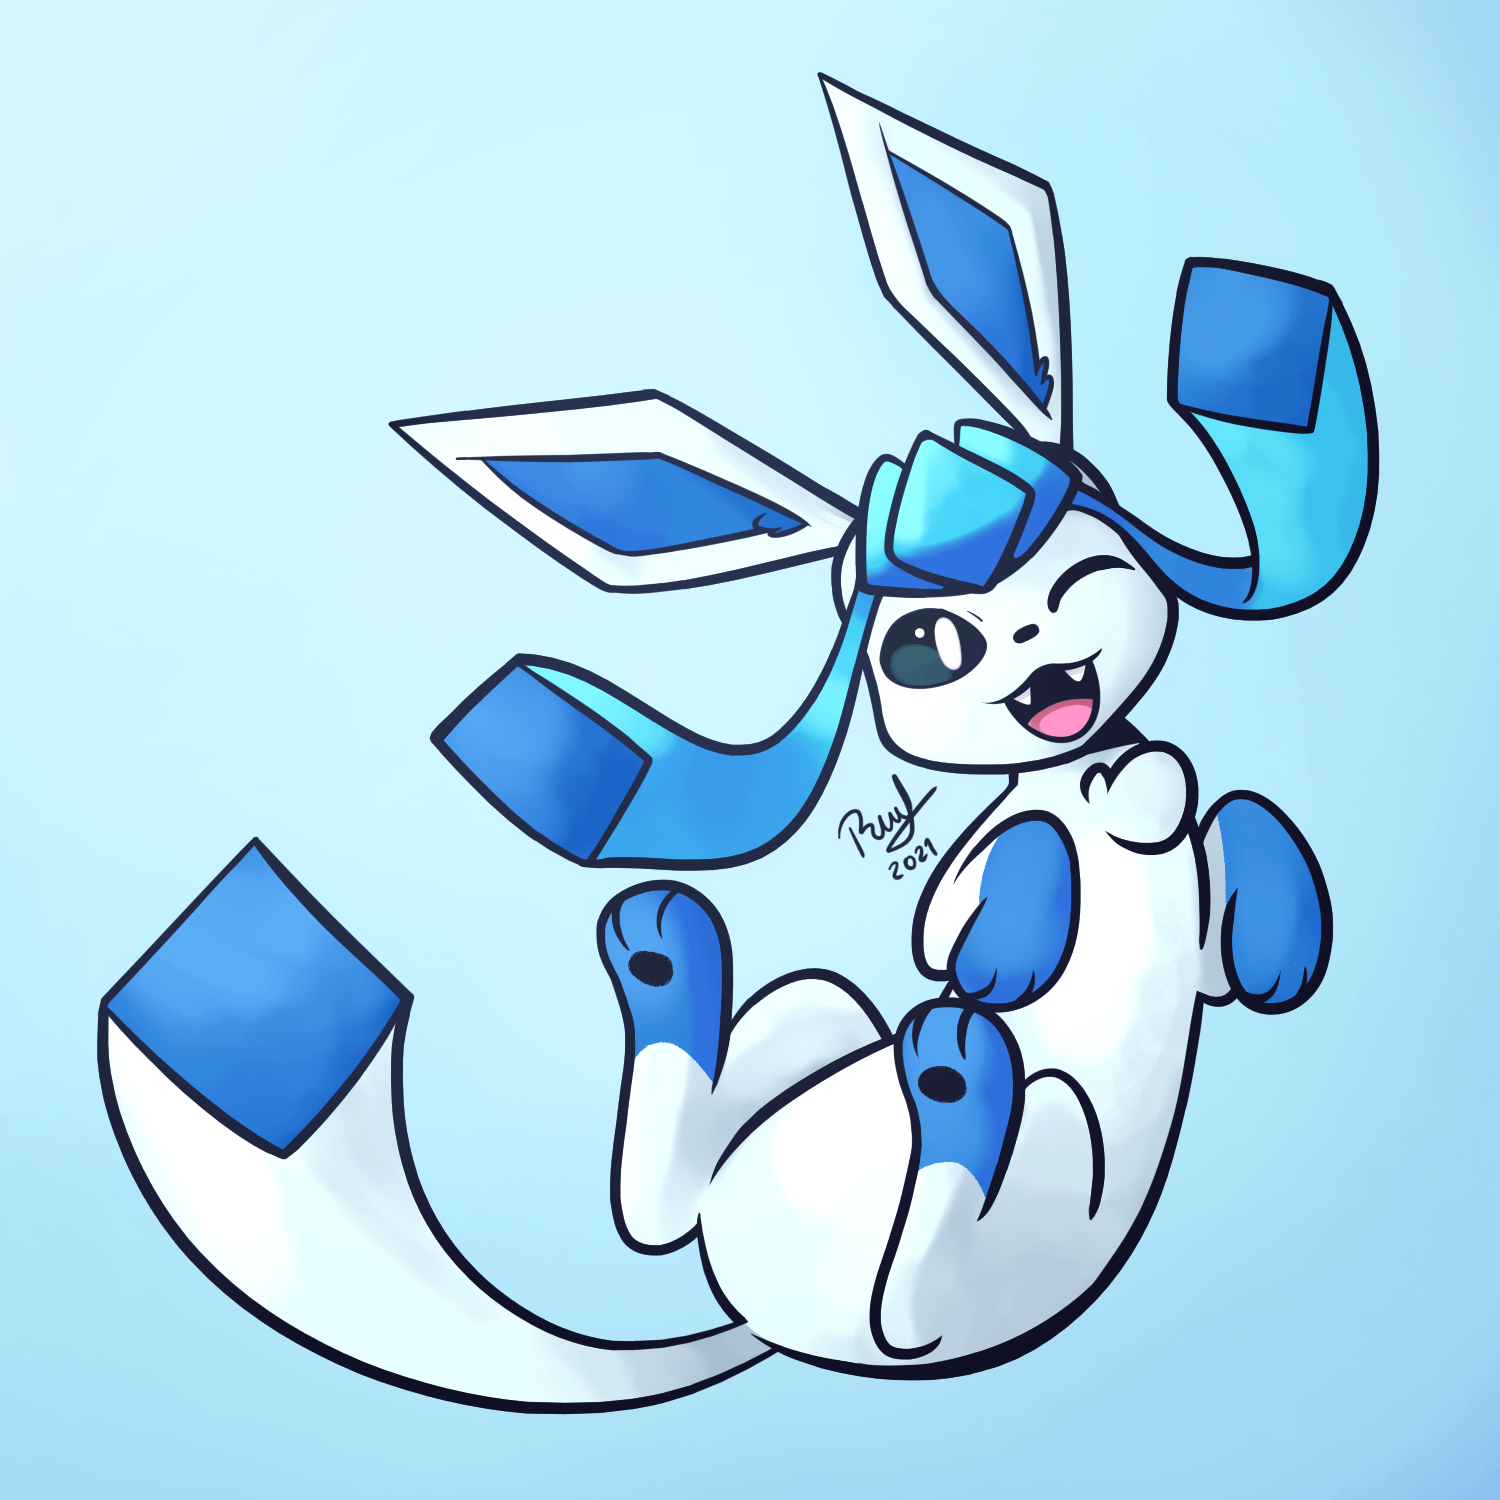 Just glaceon by me rfurry